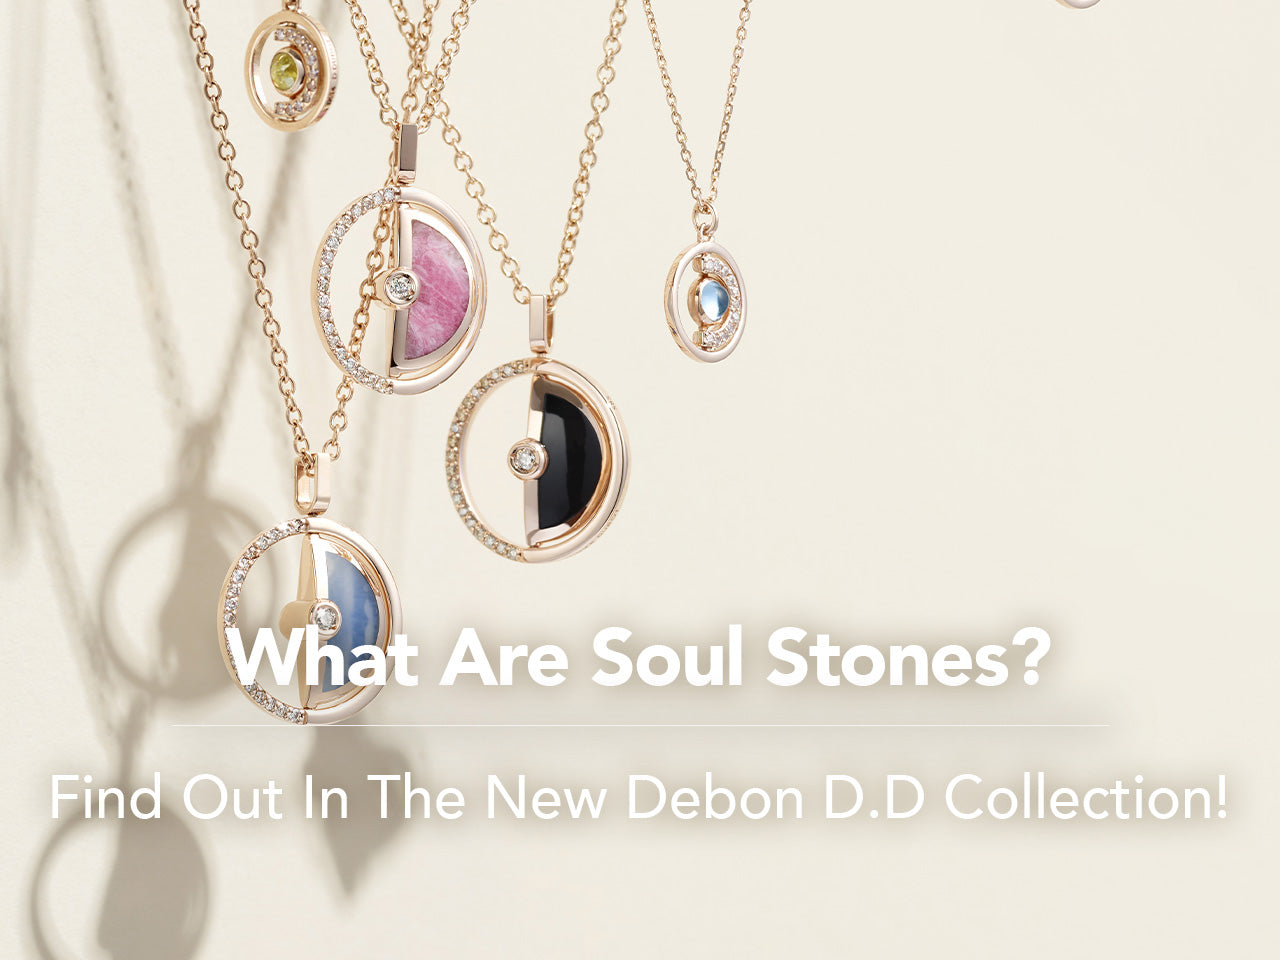 What Are Soul Stones? Find Out In The New Debon D.D Collection!